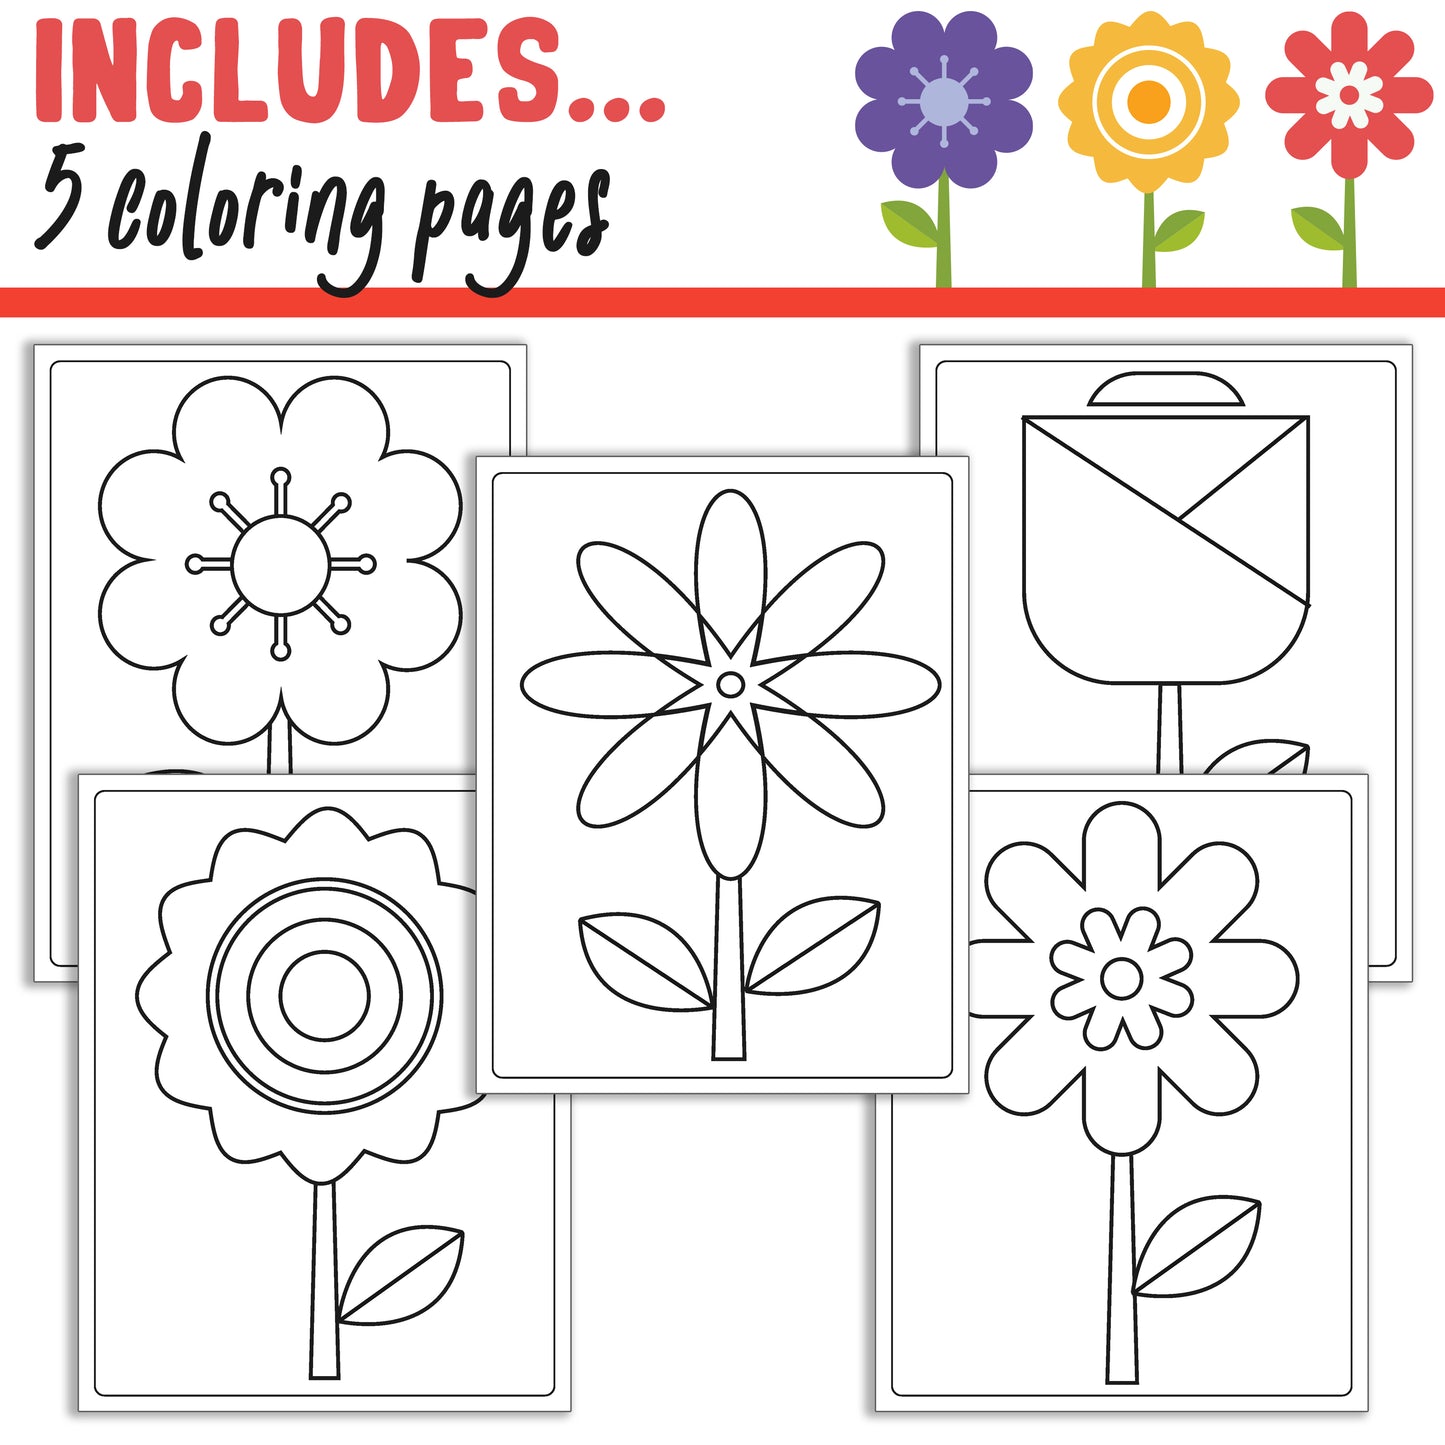 How To Draw Flowers, Directed Drawing Step by Step Tutorial, Includes 5 Coloring Pages, PDF File, Instant Download